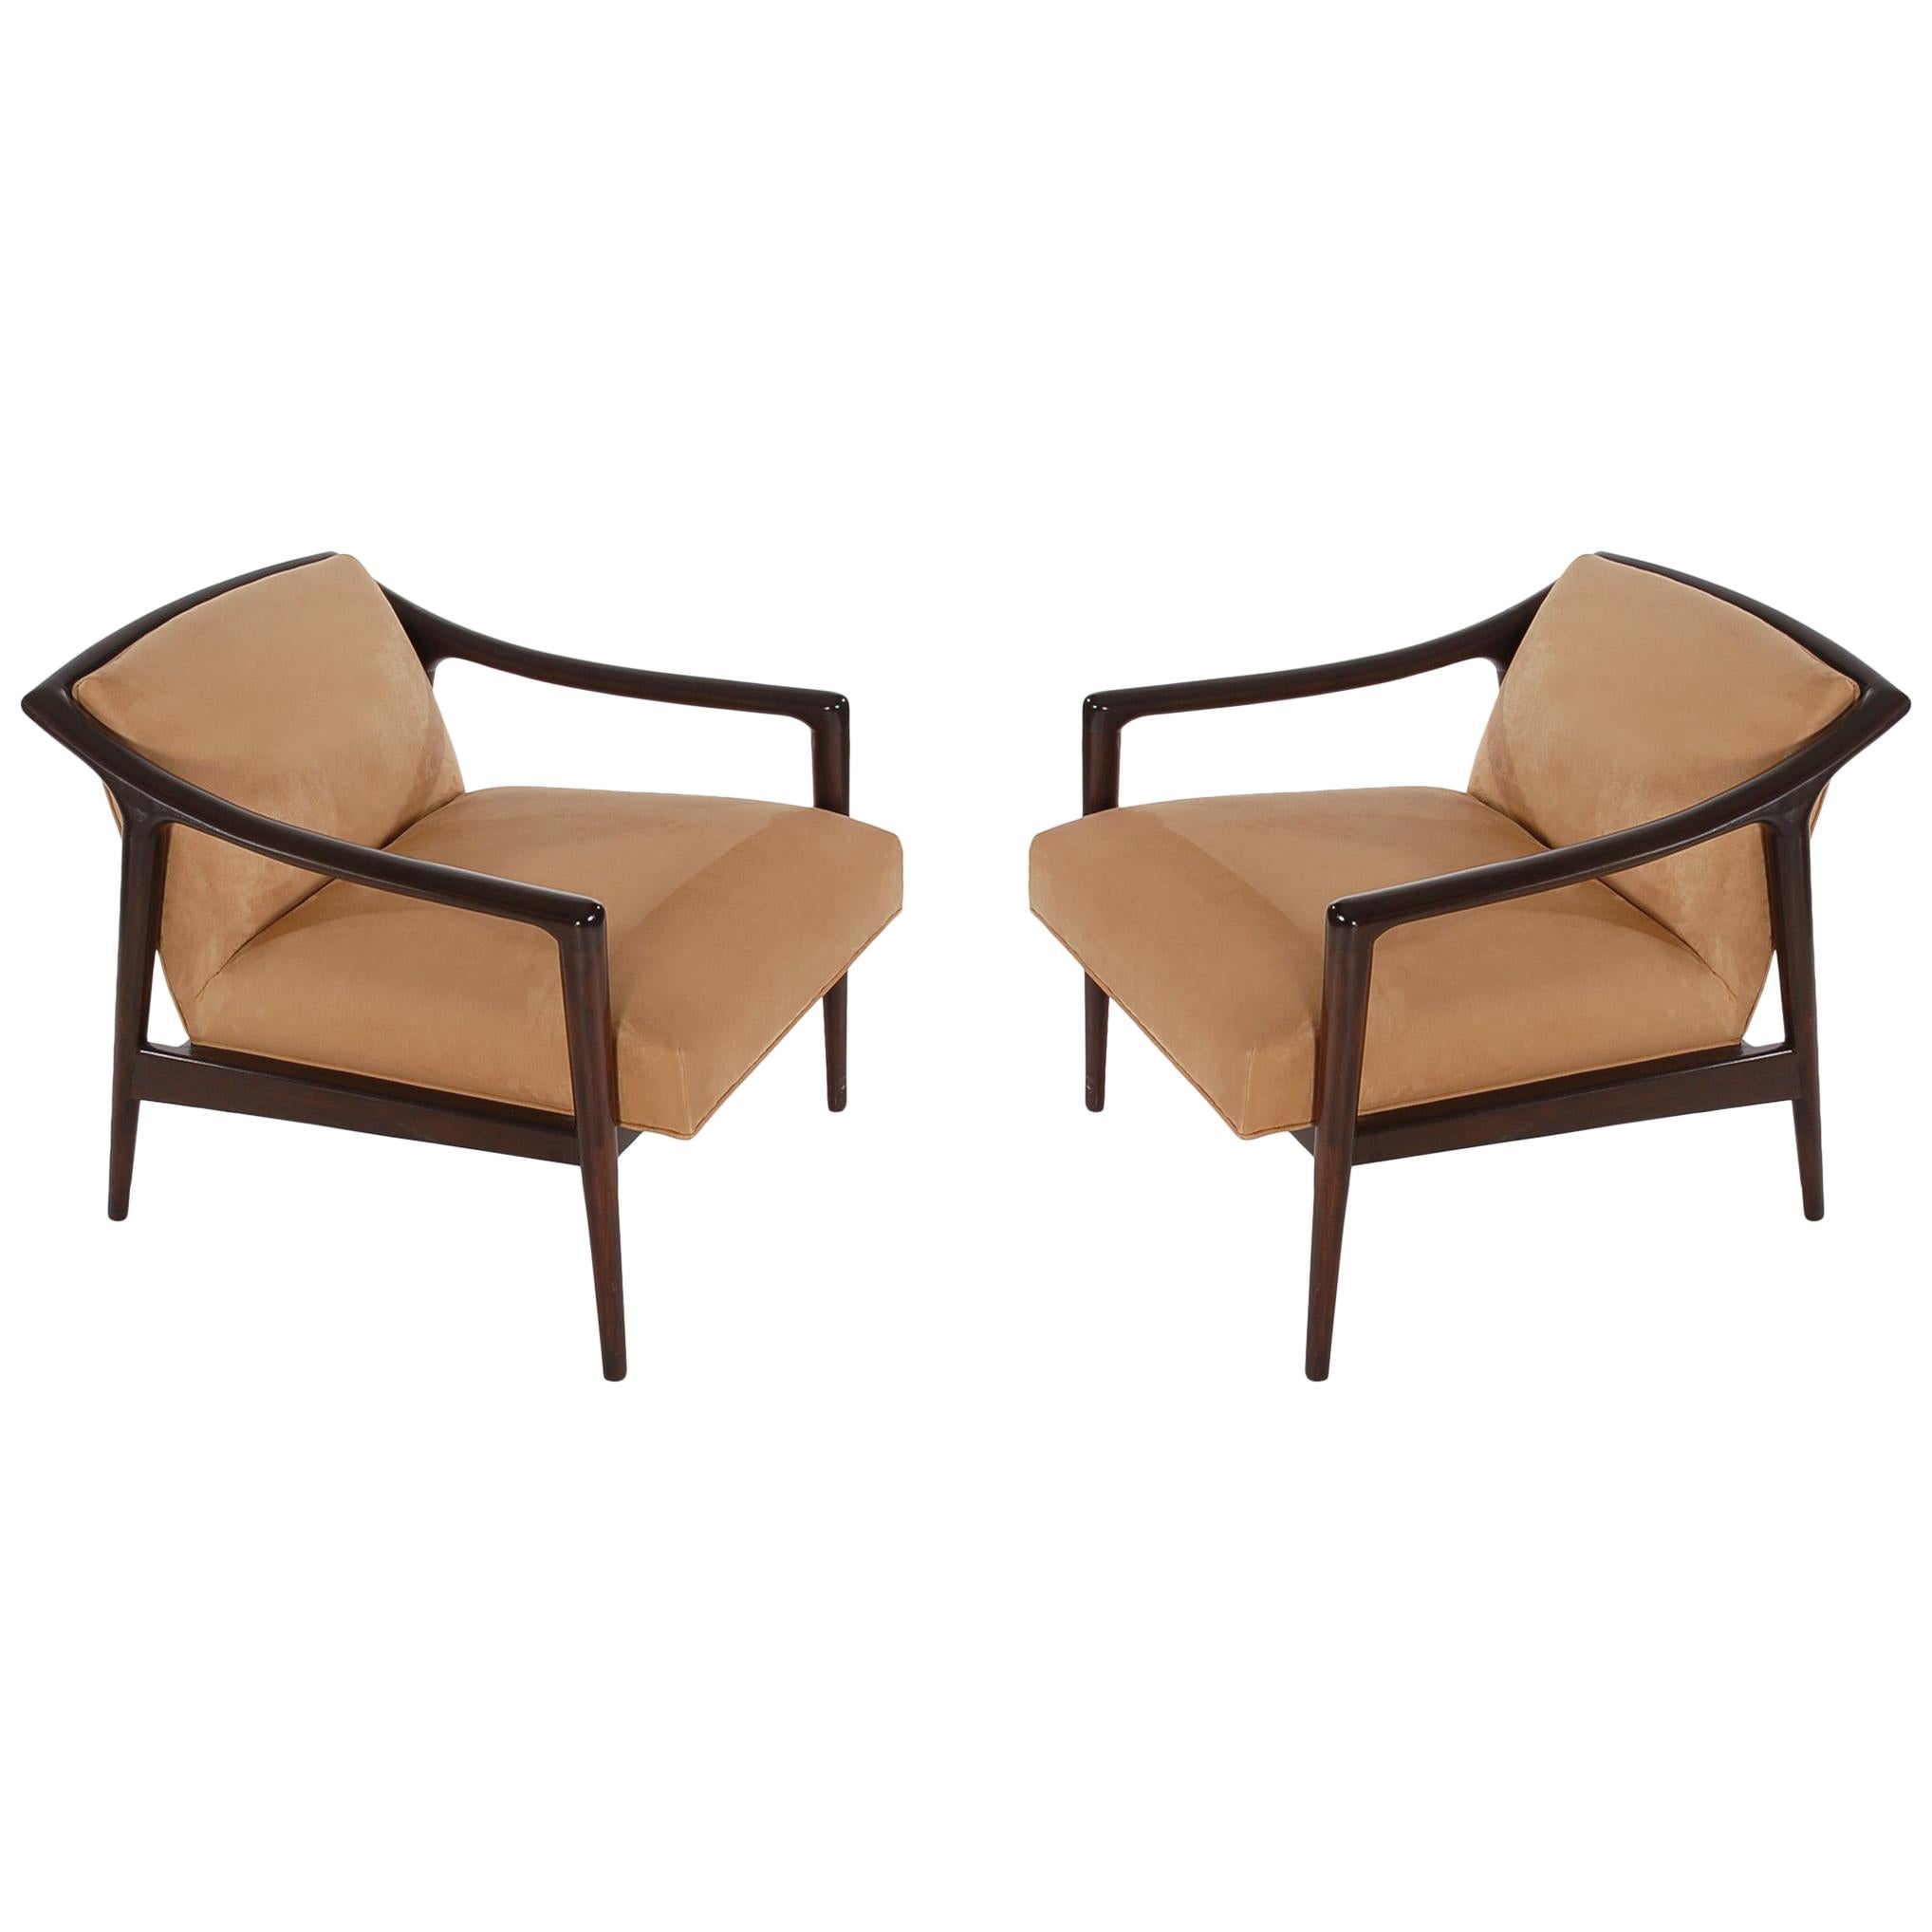 Pair of Midcentury Italian Modern Lounge Chairs in Walnut after Gio Ponti